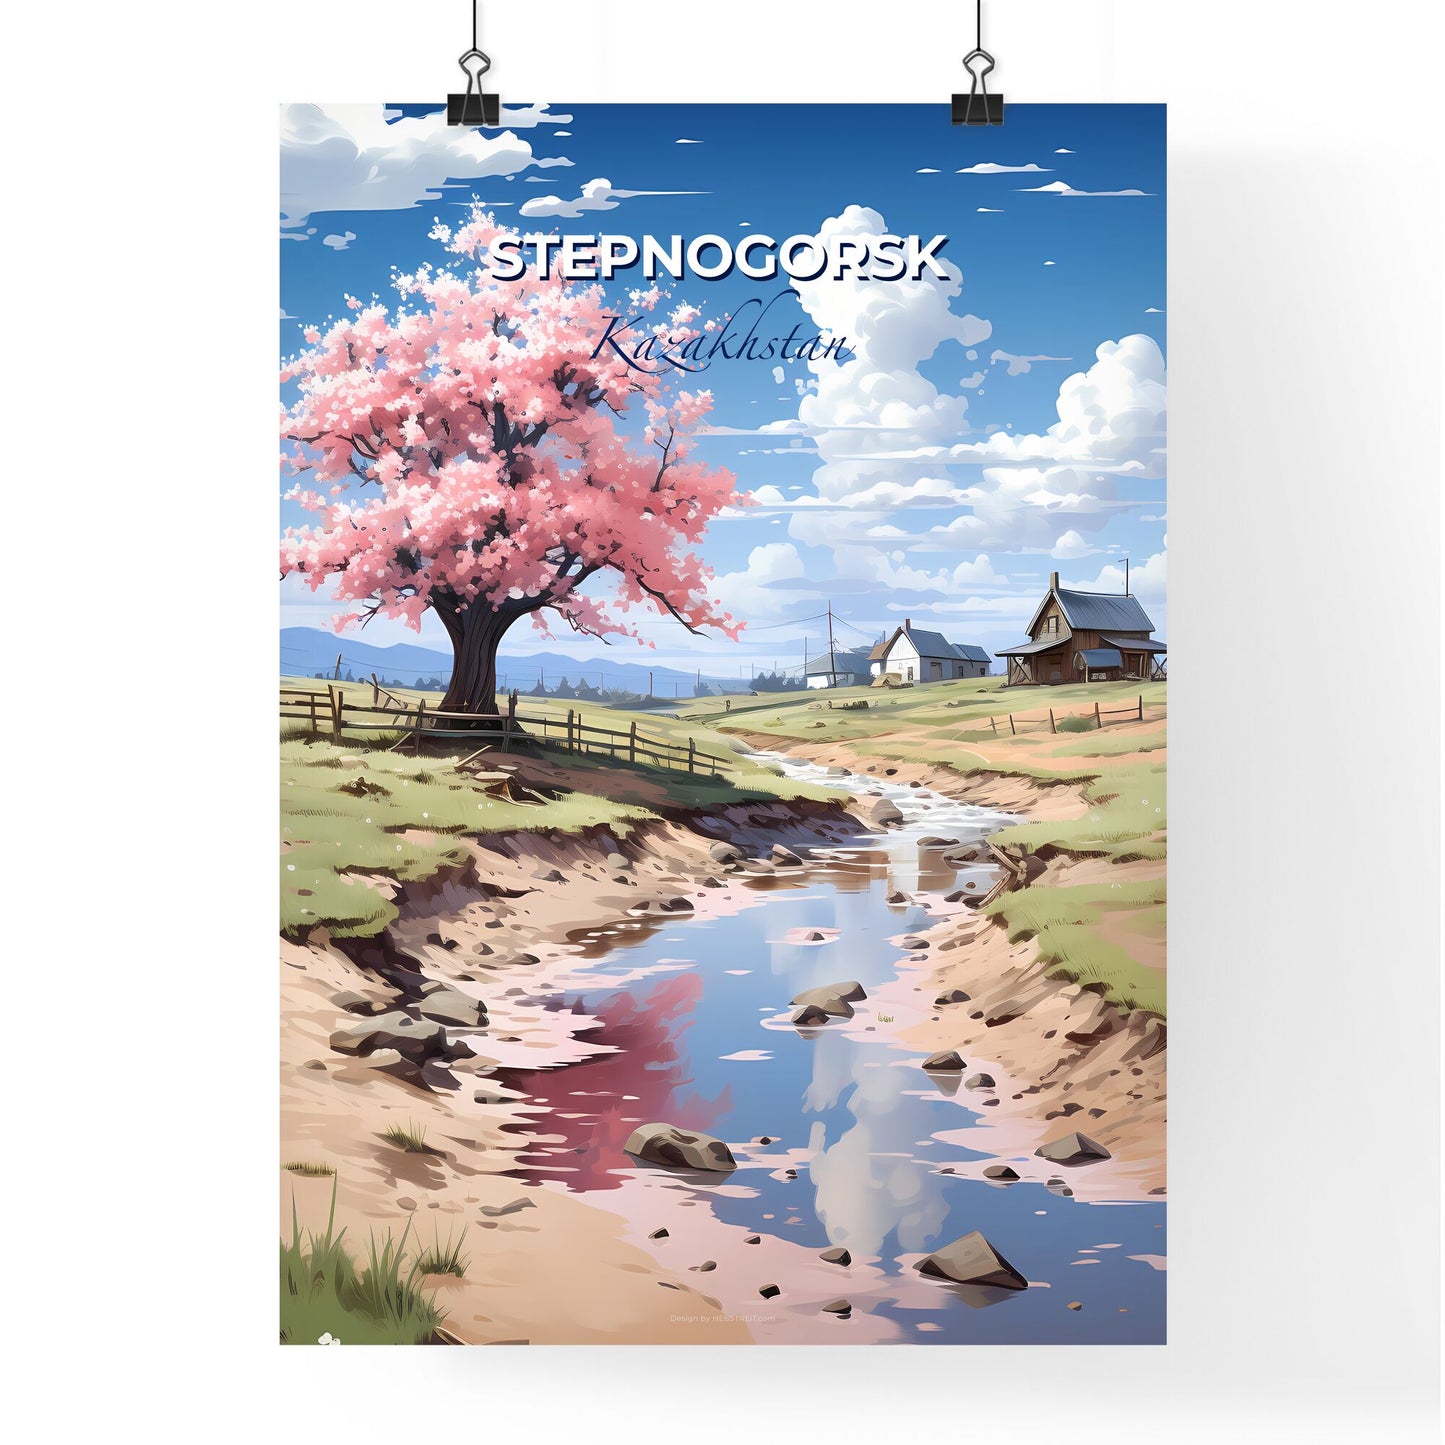 Stepnogorsk, Kazakhstan, A Poster of a stream running through a field with a tree in the foreground Default Title